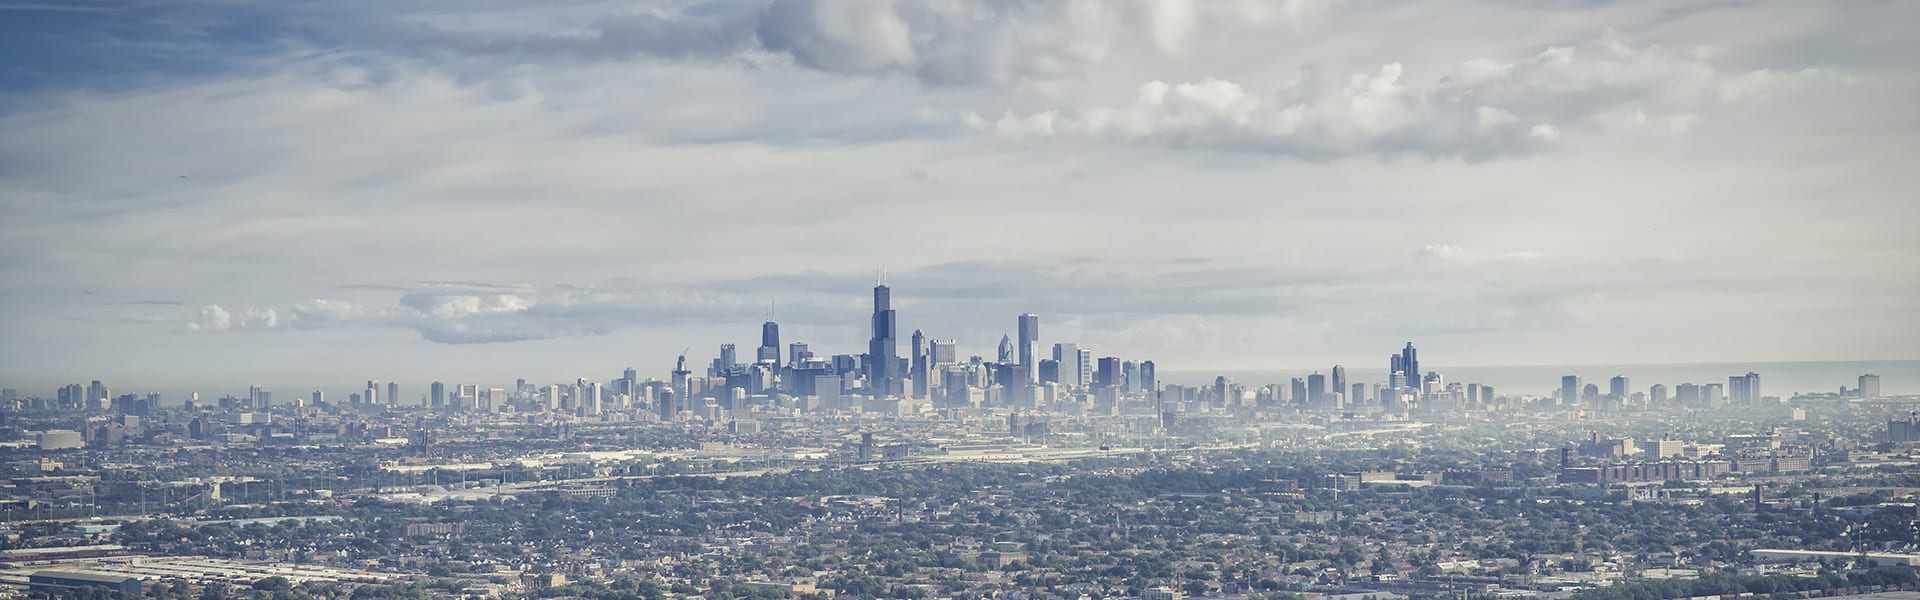 View of Chicago from the suburbs